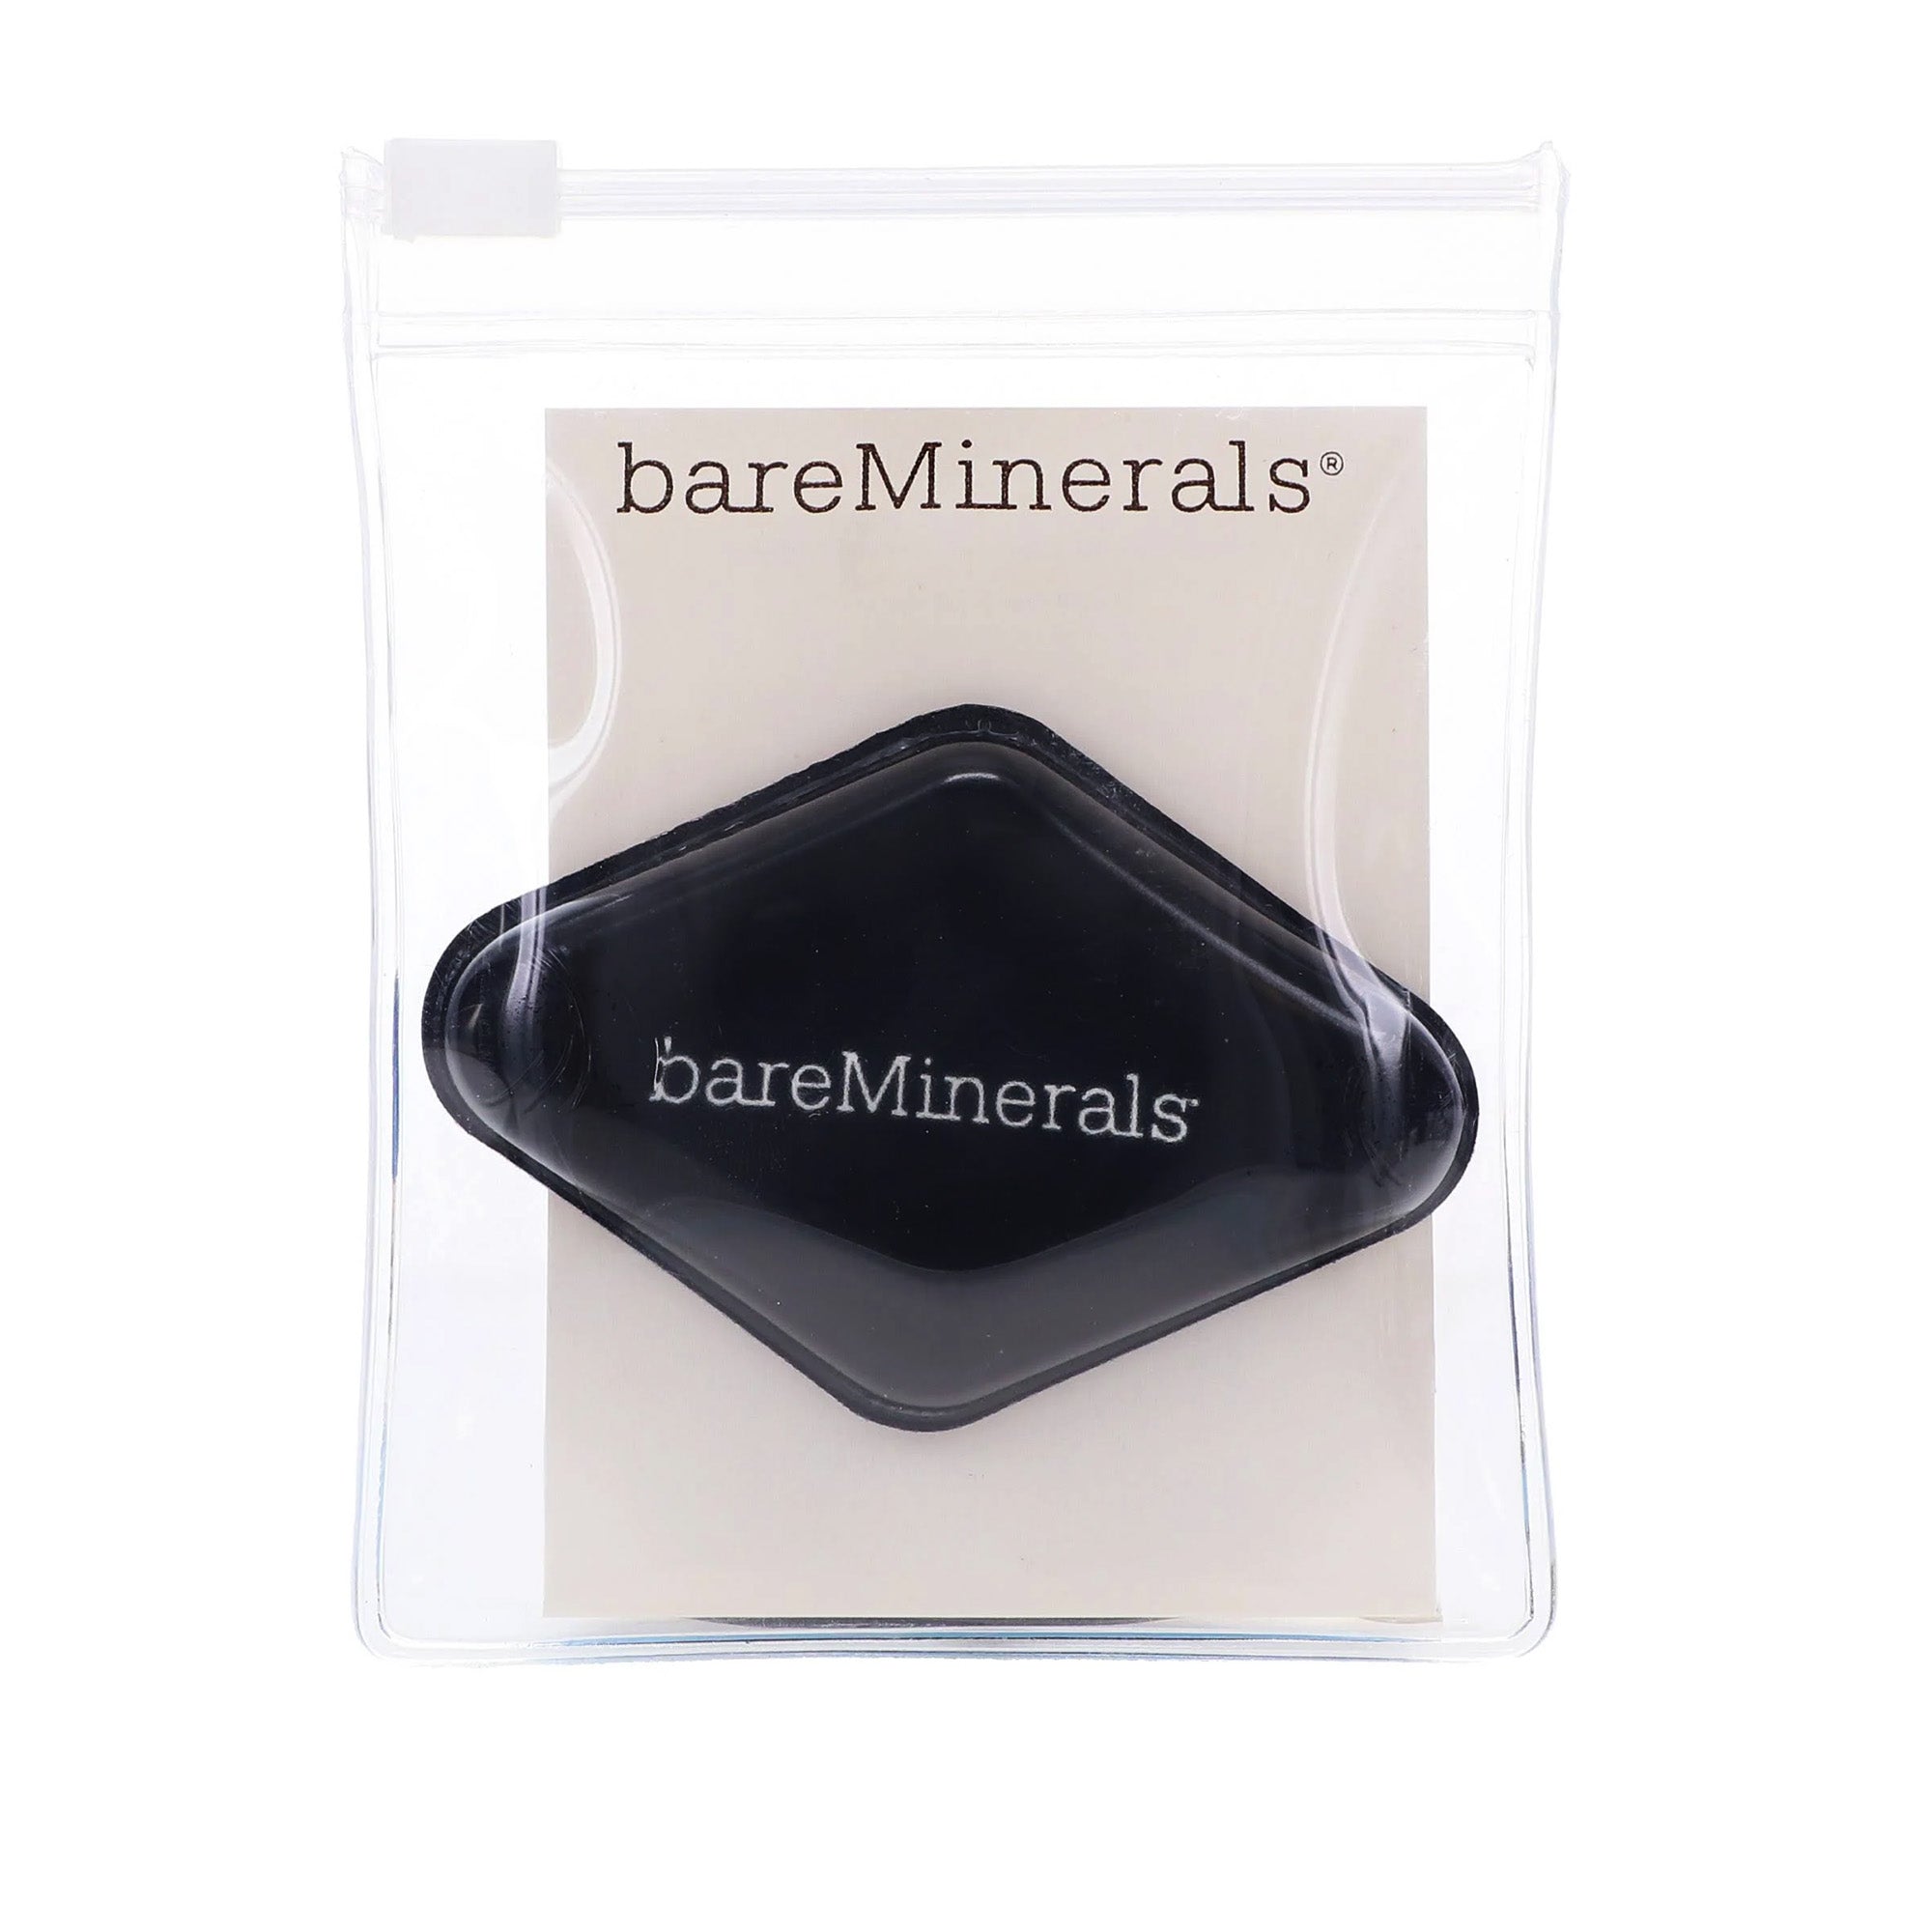 bareMinerals Dual-sided Silicone Blender